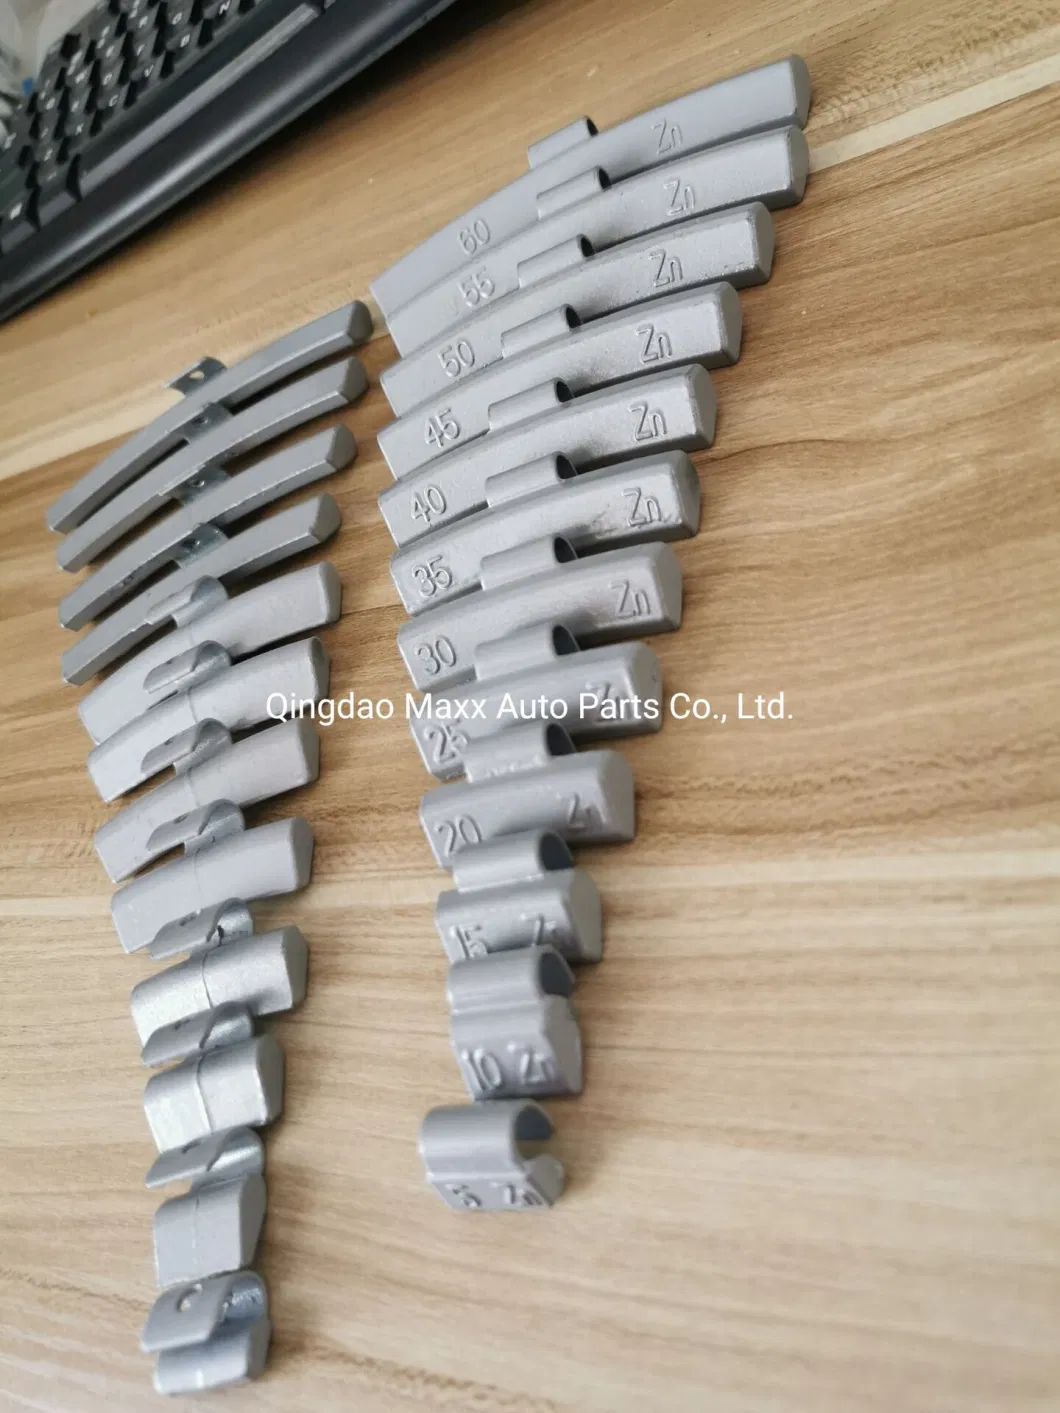 China Factory Zinc Clip Wheel Weight 5g to 60g Balancing Weights for Rim